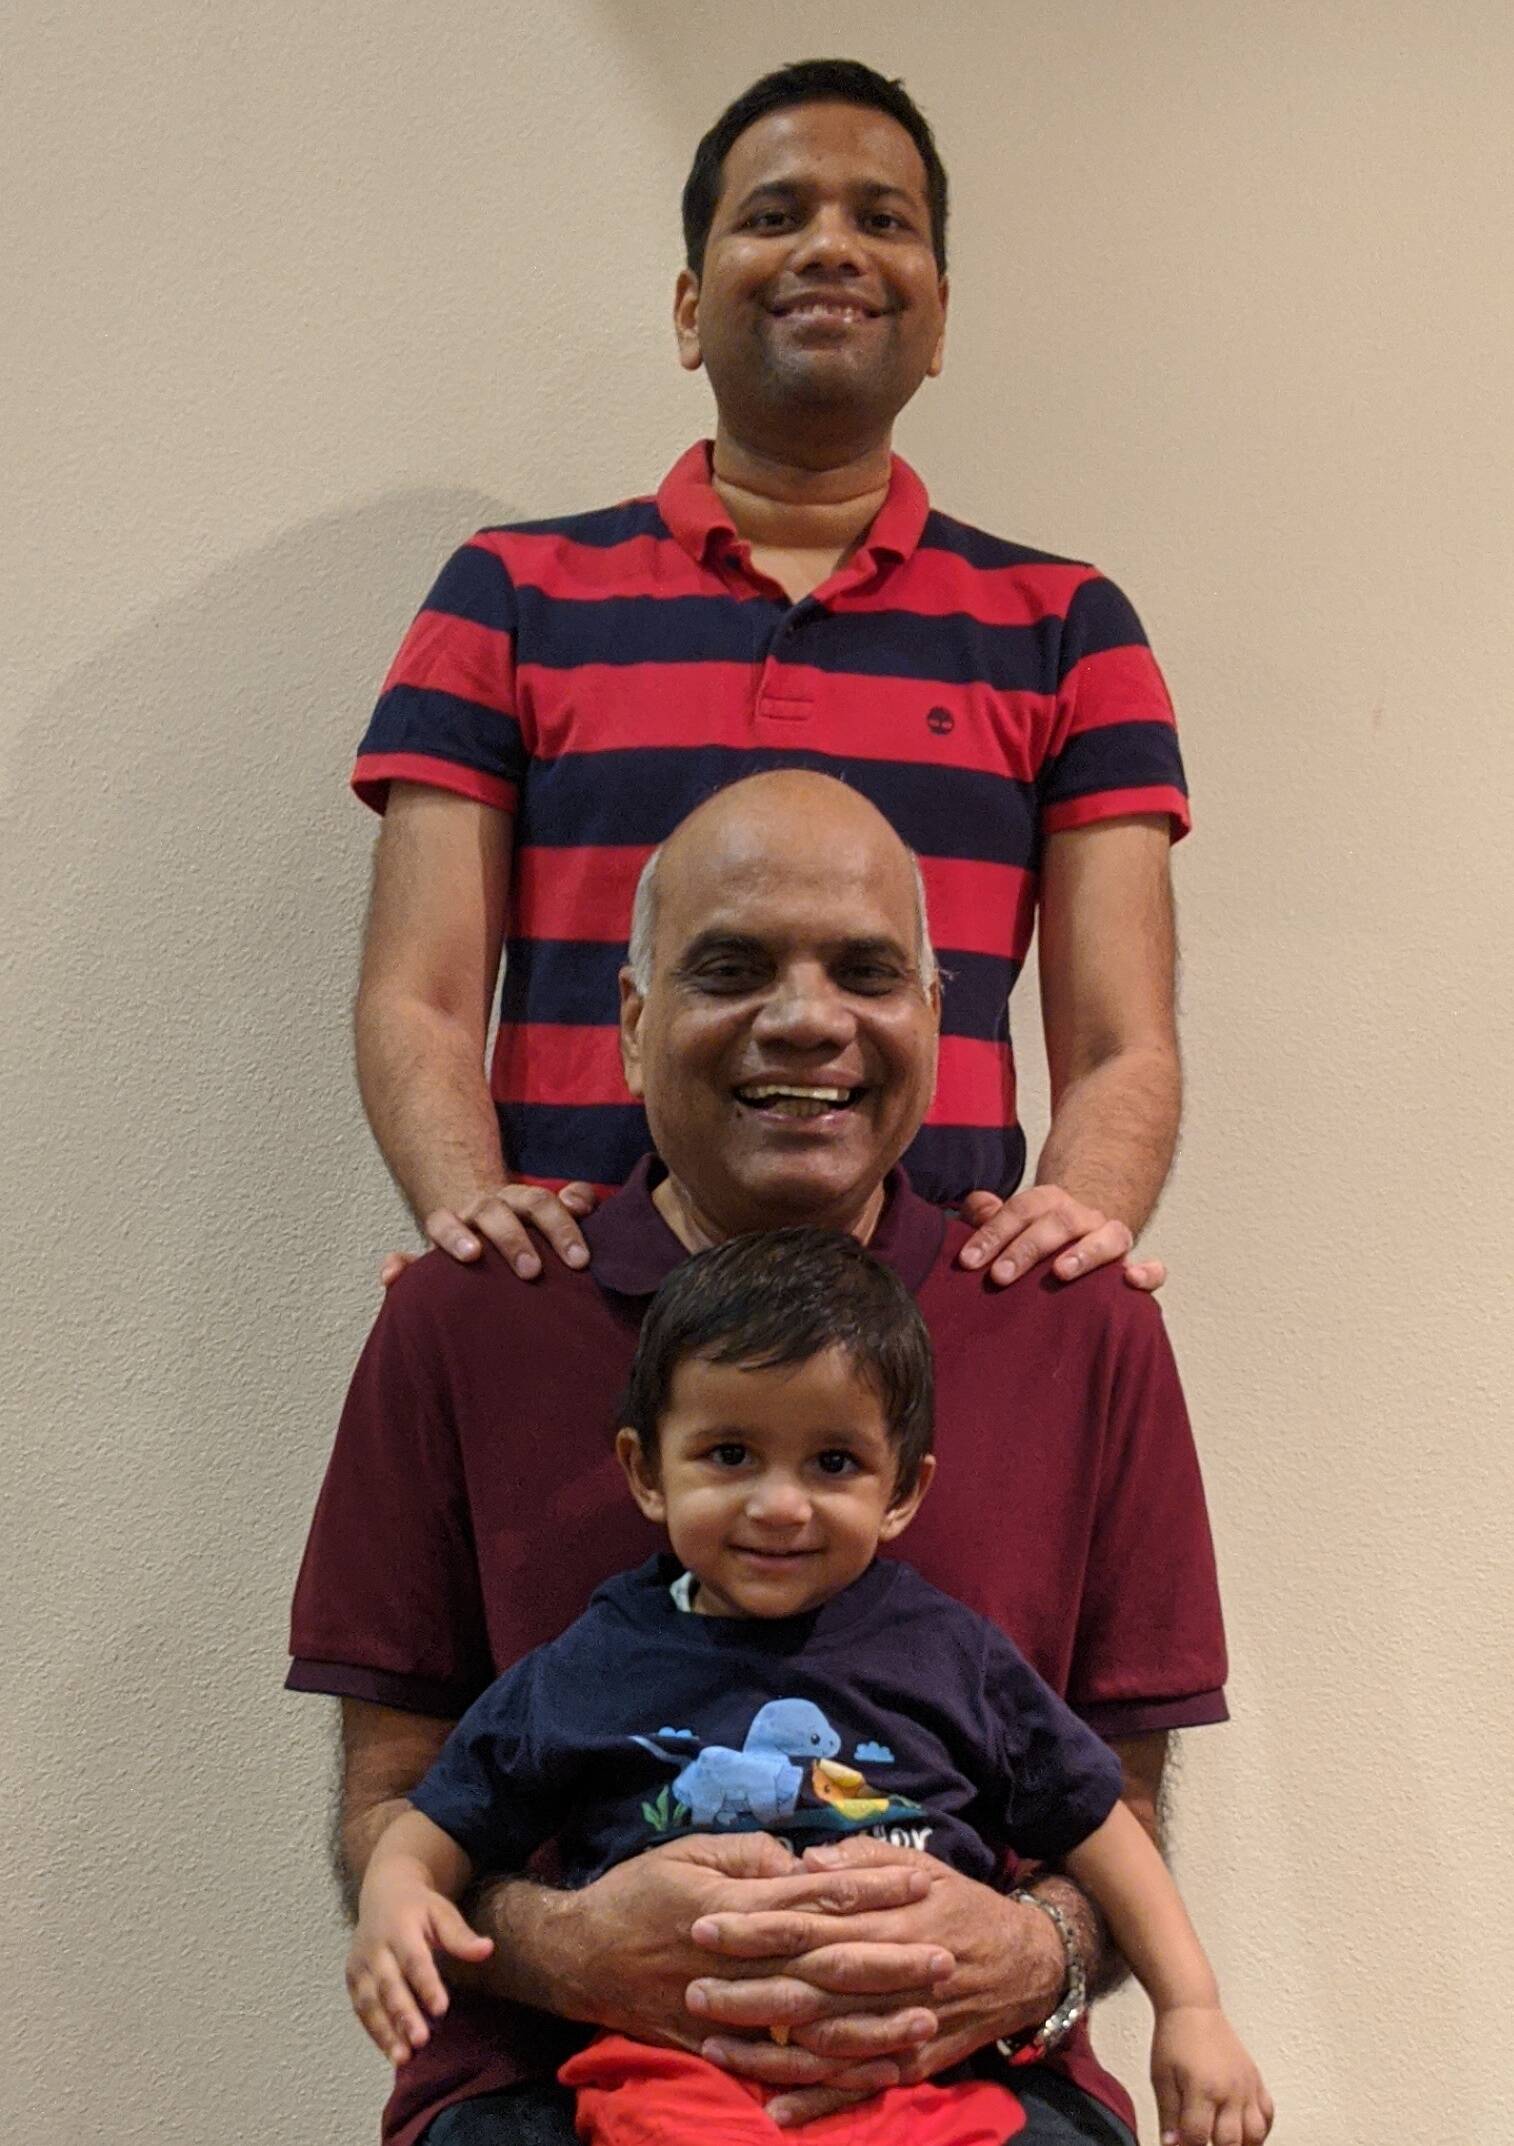 Image A happy moment early 2020 celebrating my father’s birthday in Houston. My father holds my younger son and I stand behind him – three generations.